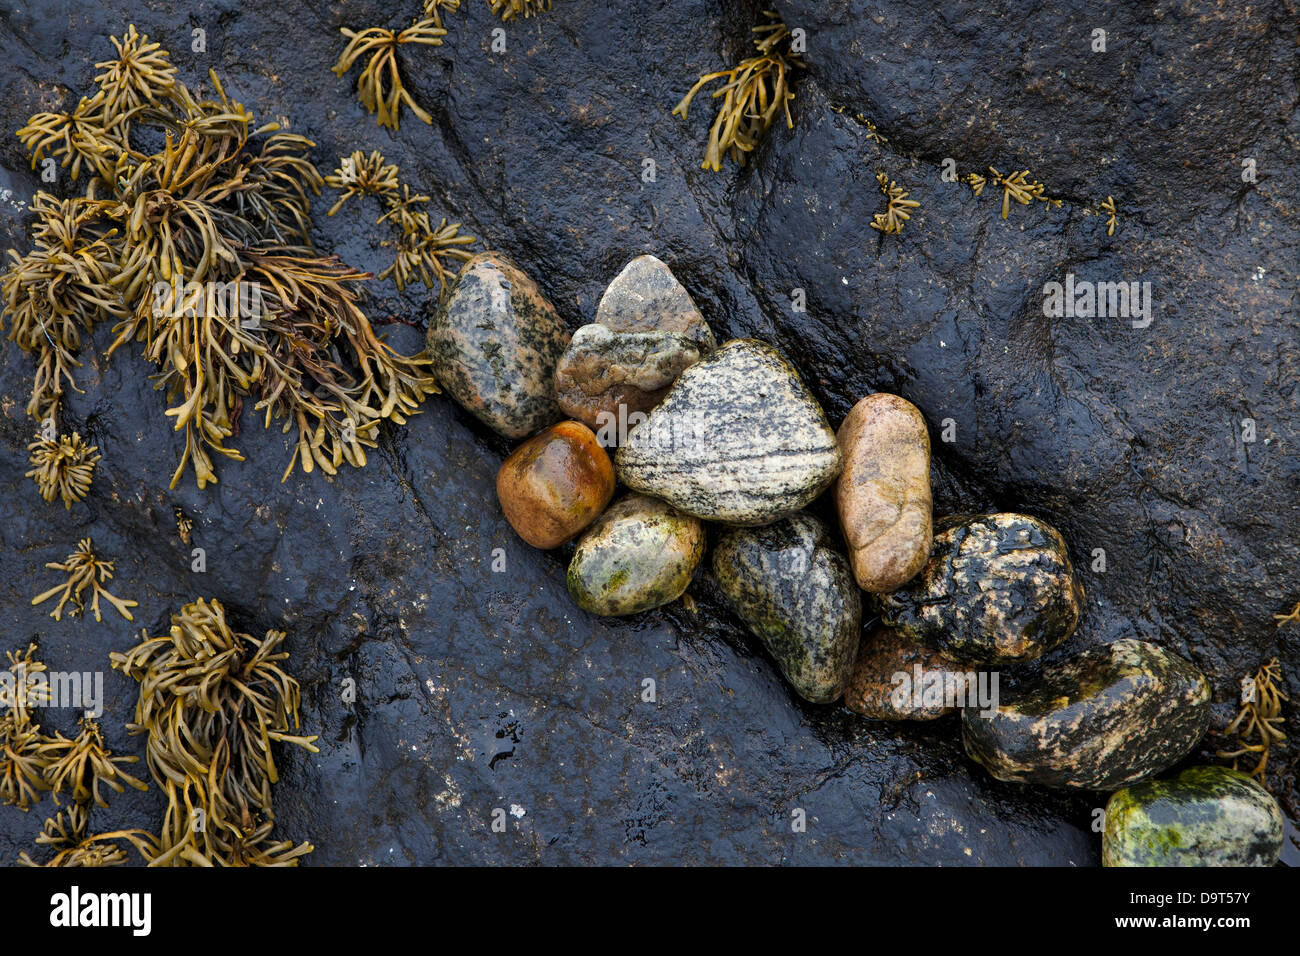 details on the beach at Lochinver, Sutherland, Scotland, UK Stock Photo